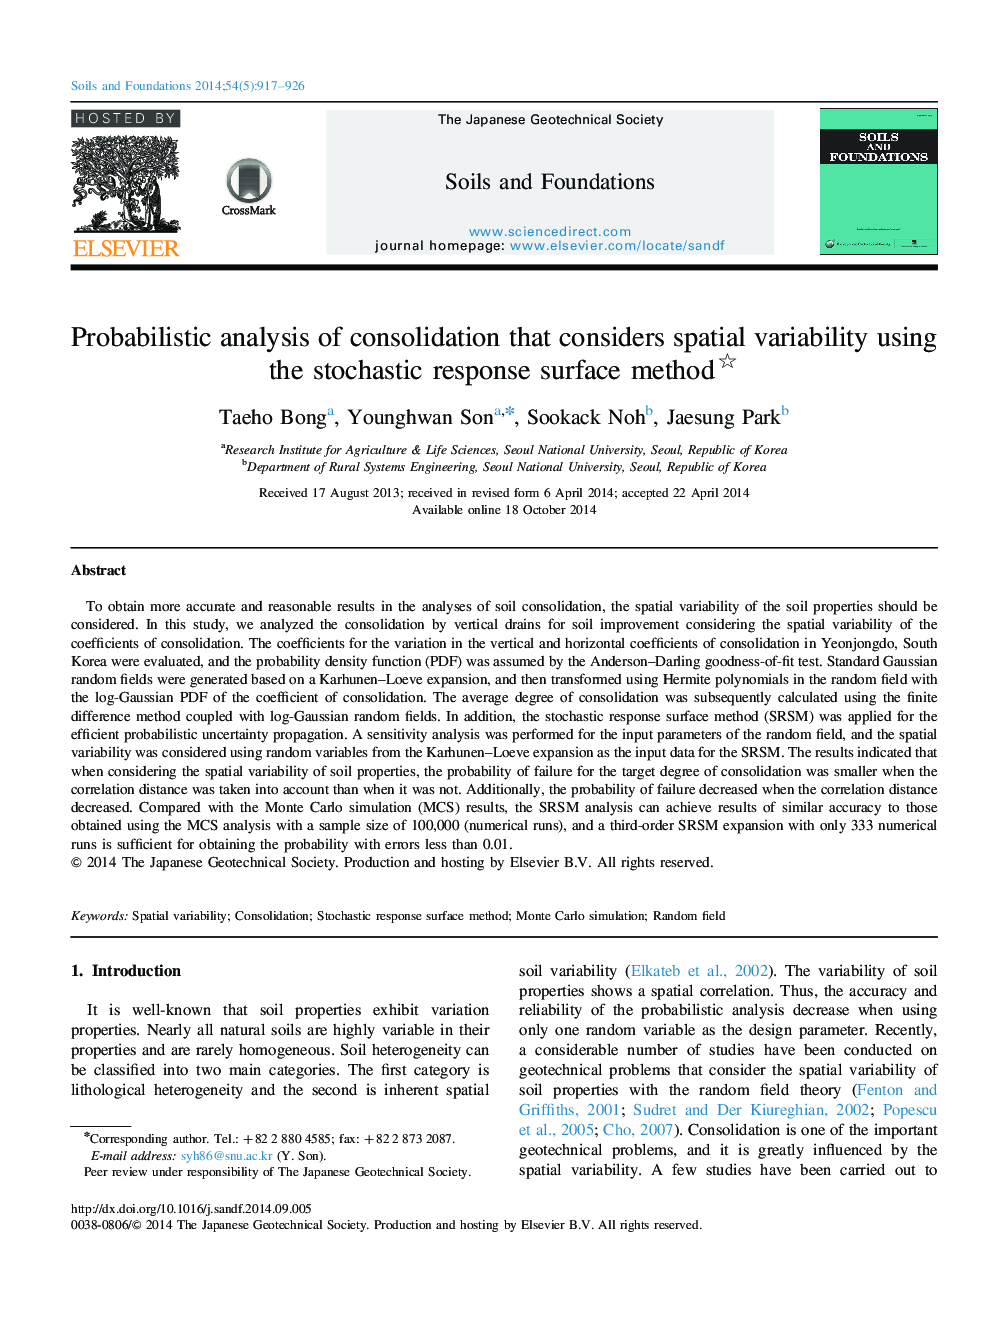 Probabilistic analysis of consolidation that considers spatial variability using the stochastic response surface method 